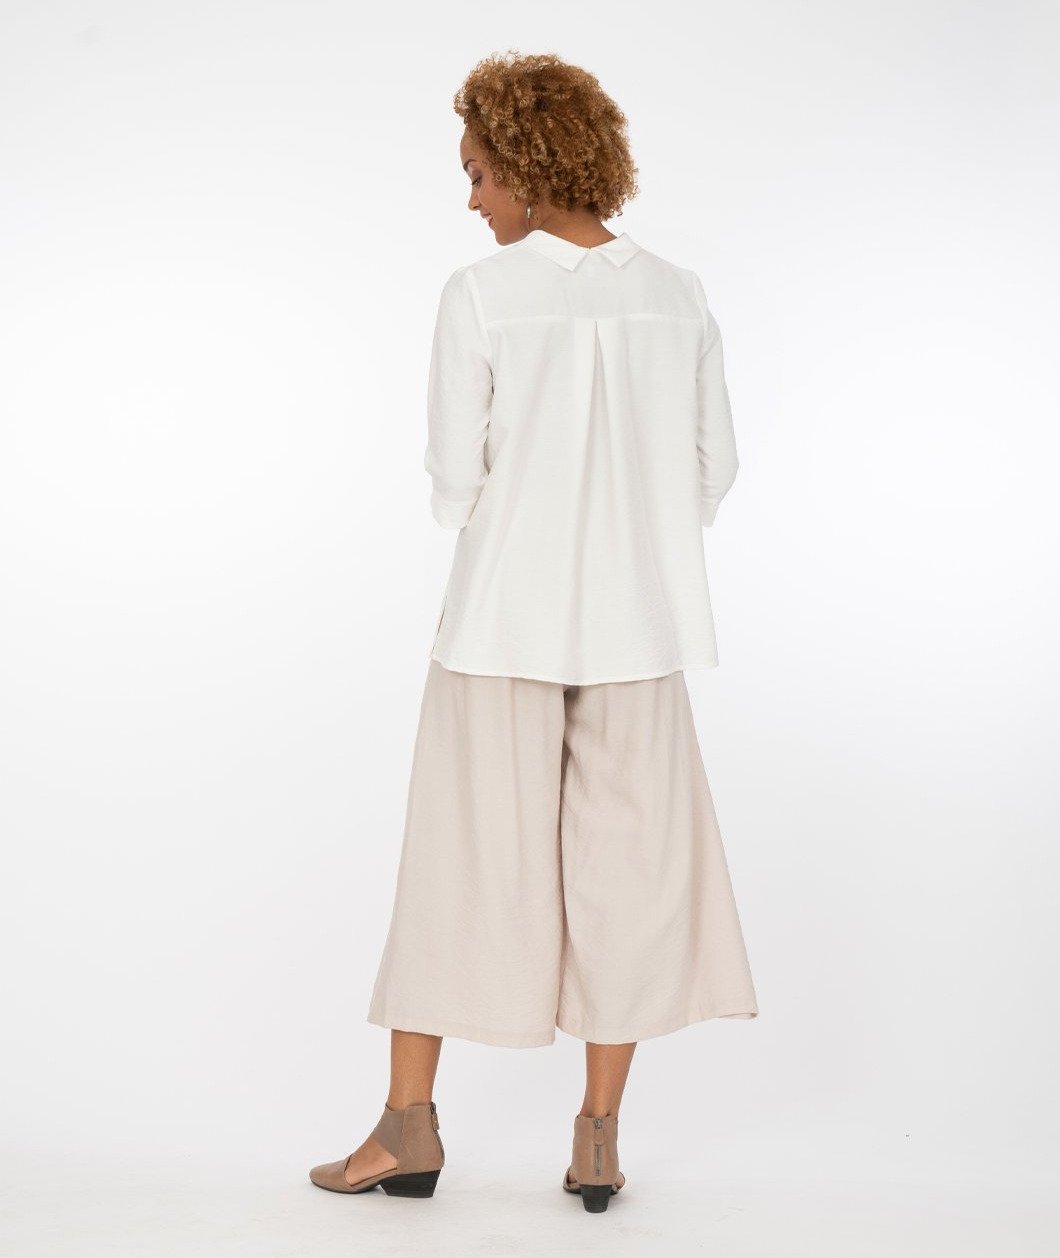 model with a white button up shirt with a khaki pant in front of a white back ground